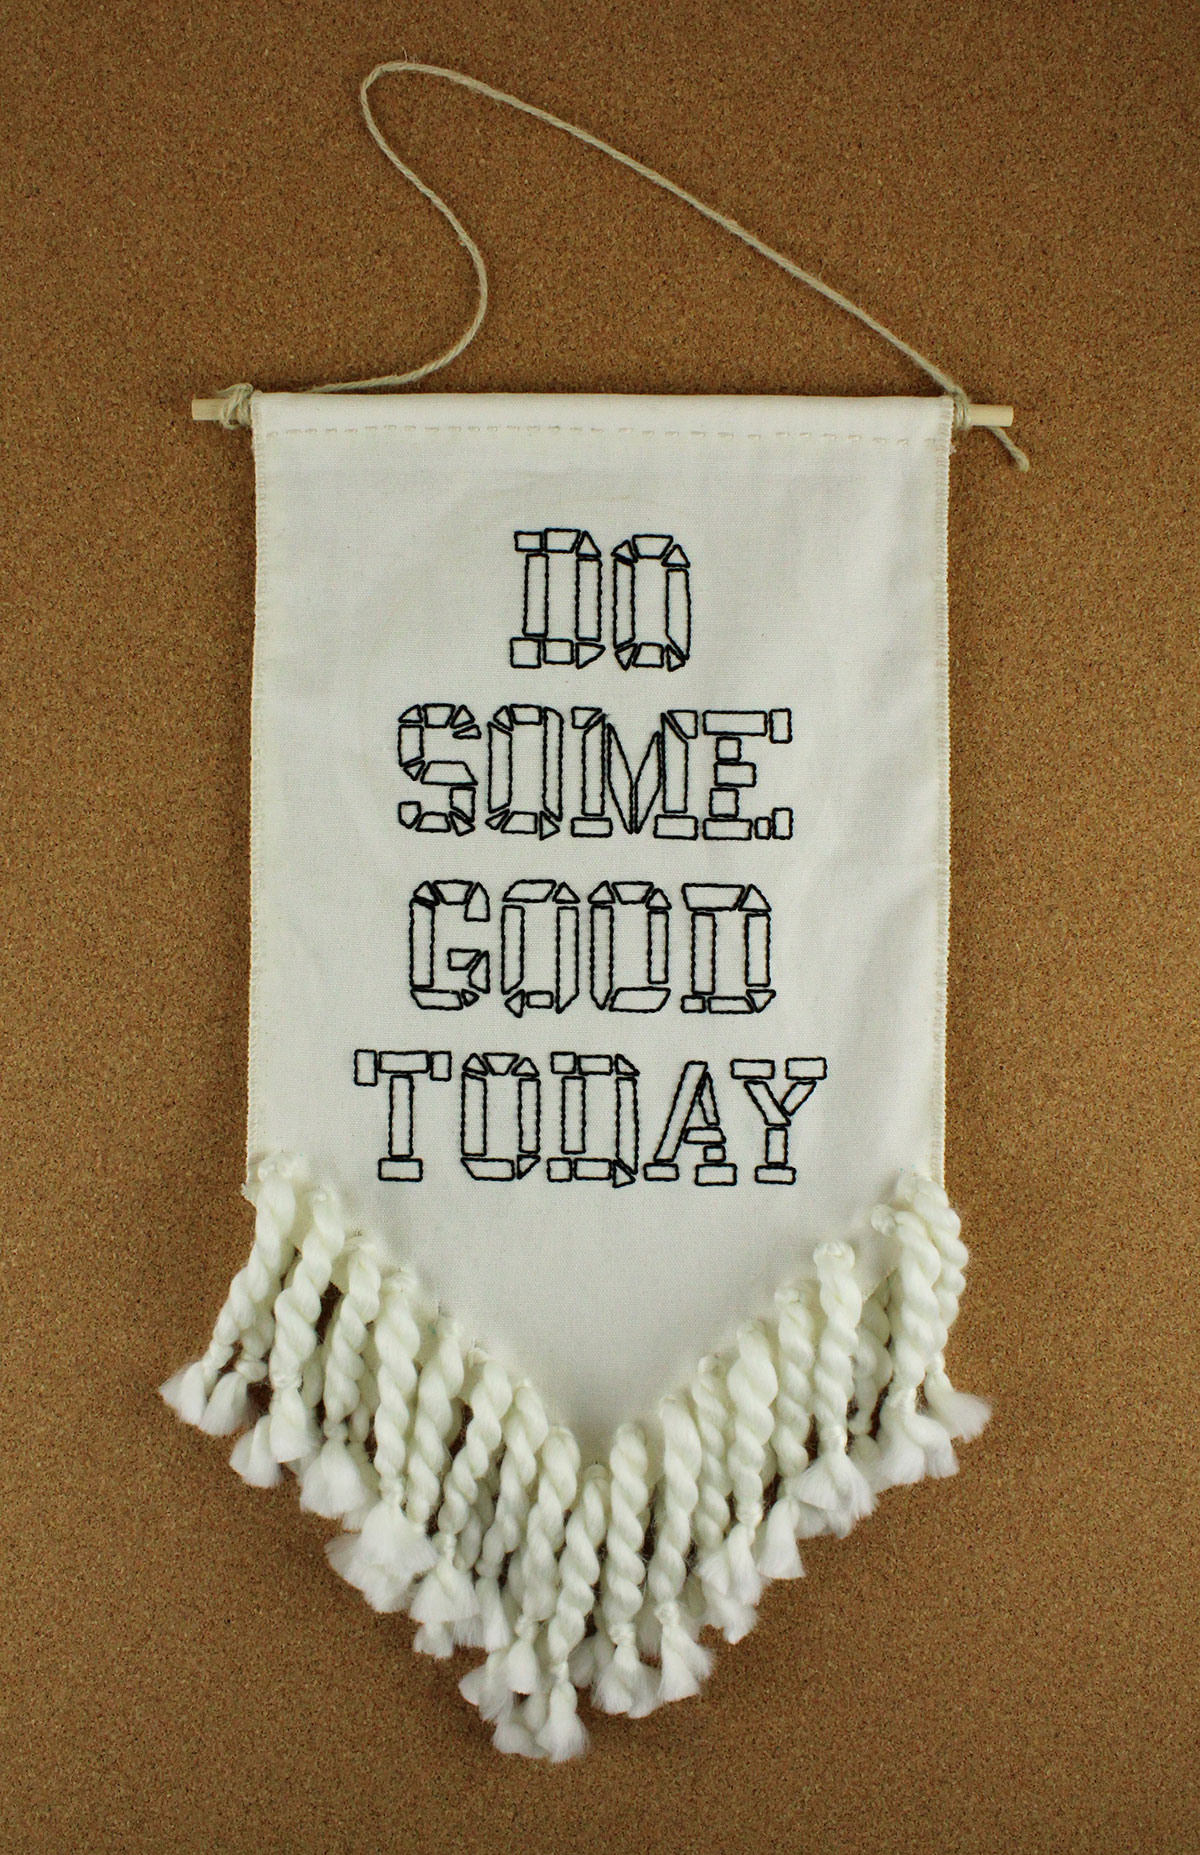 embroidered banner that says Do Some Good Today